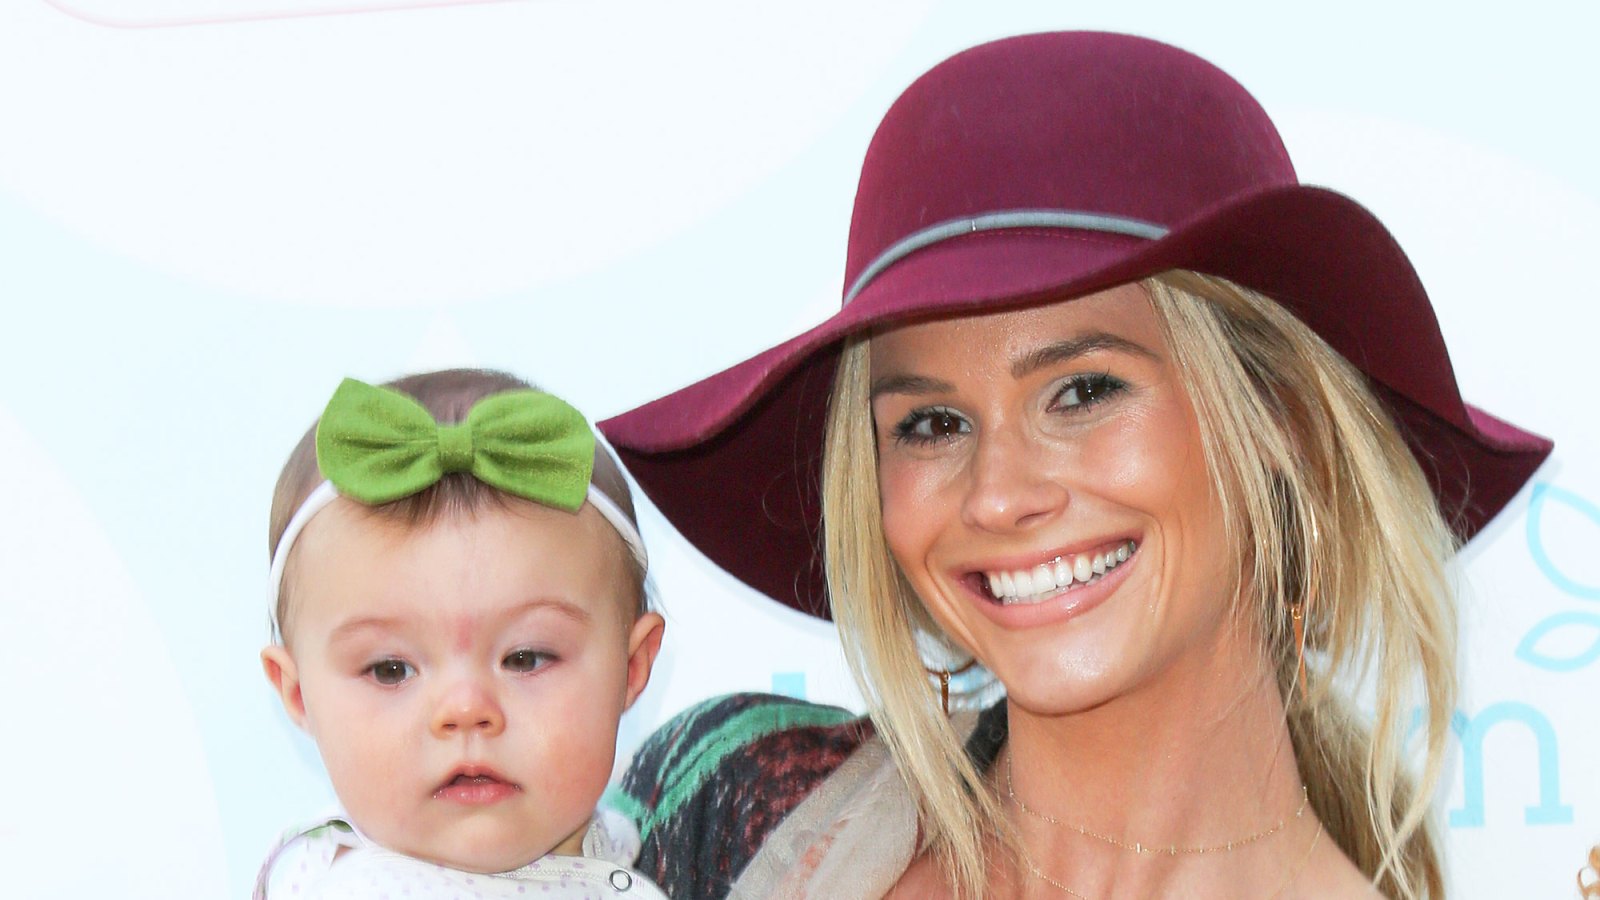 Meghan King Edmonds and her daughter Aspen attends the 6th Annual Celebrity Red CARpet Safety Awareness event at Sony Studios Commissary in Culver City, California.